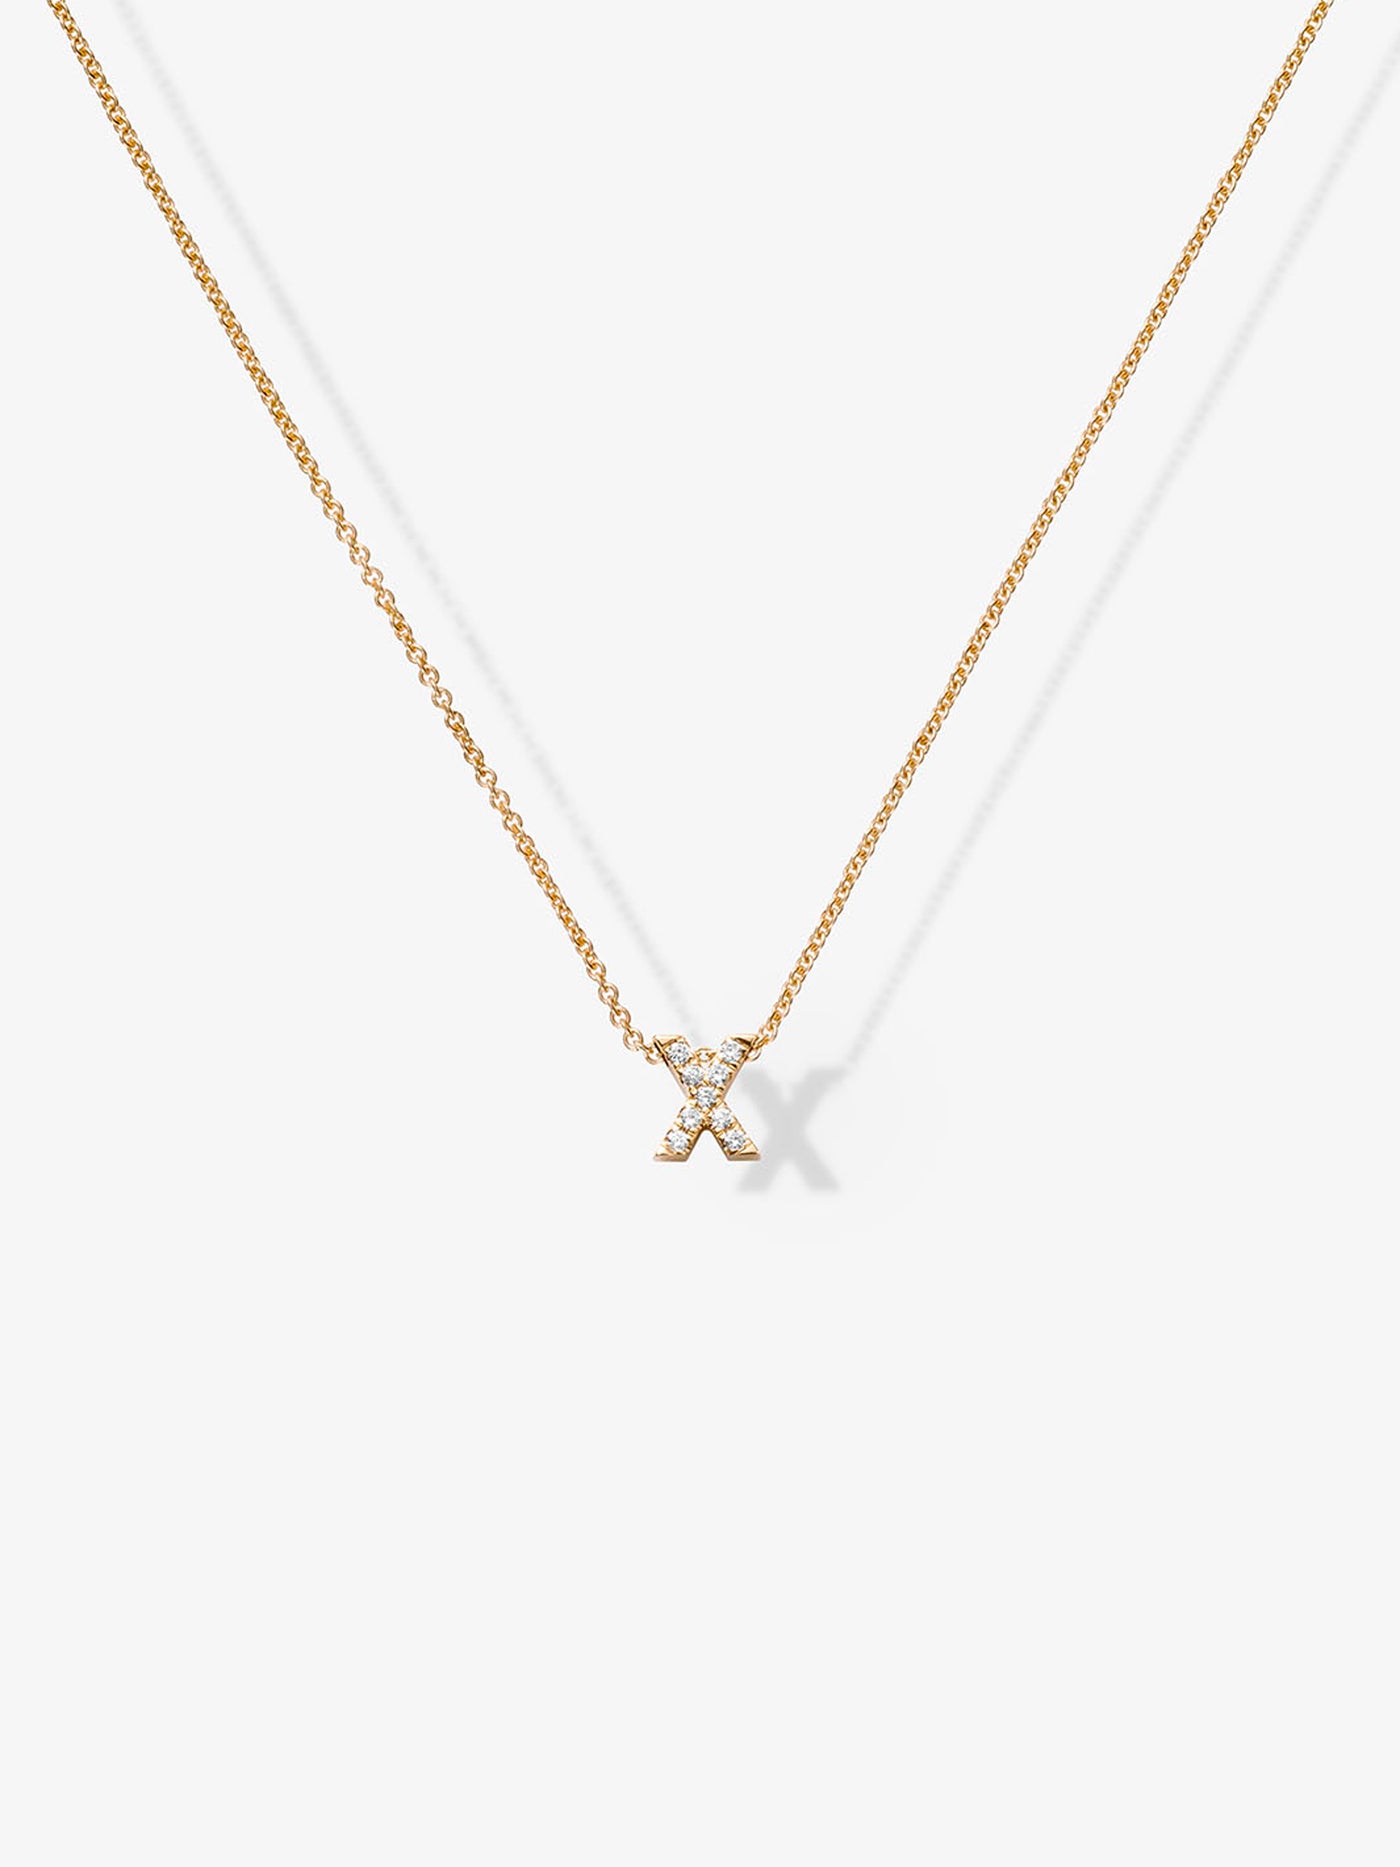 Letter X Necklace in Diamonds and 18k Gold